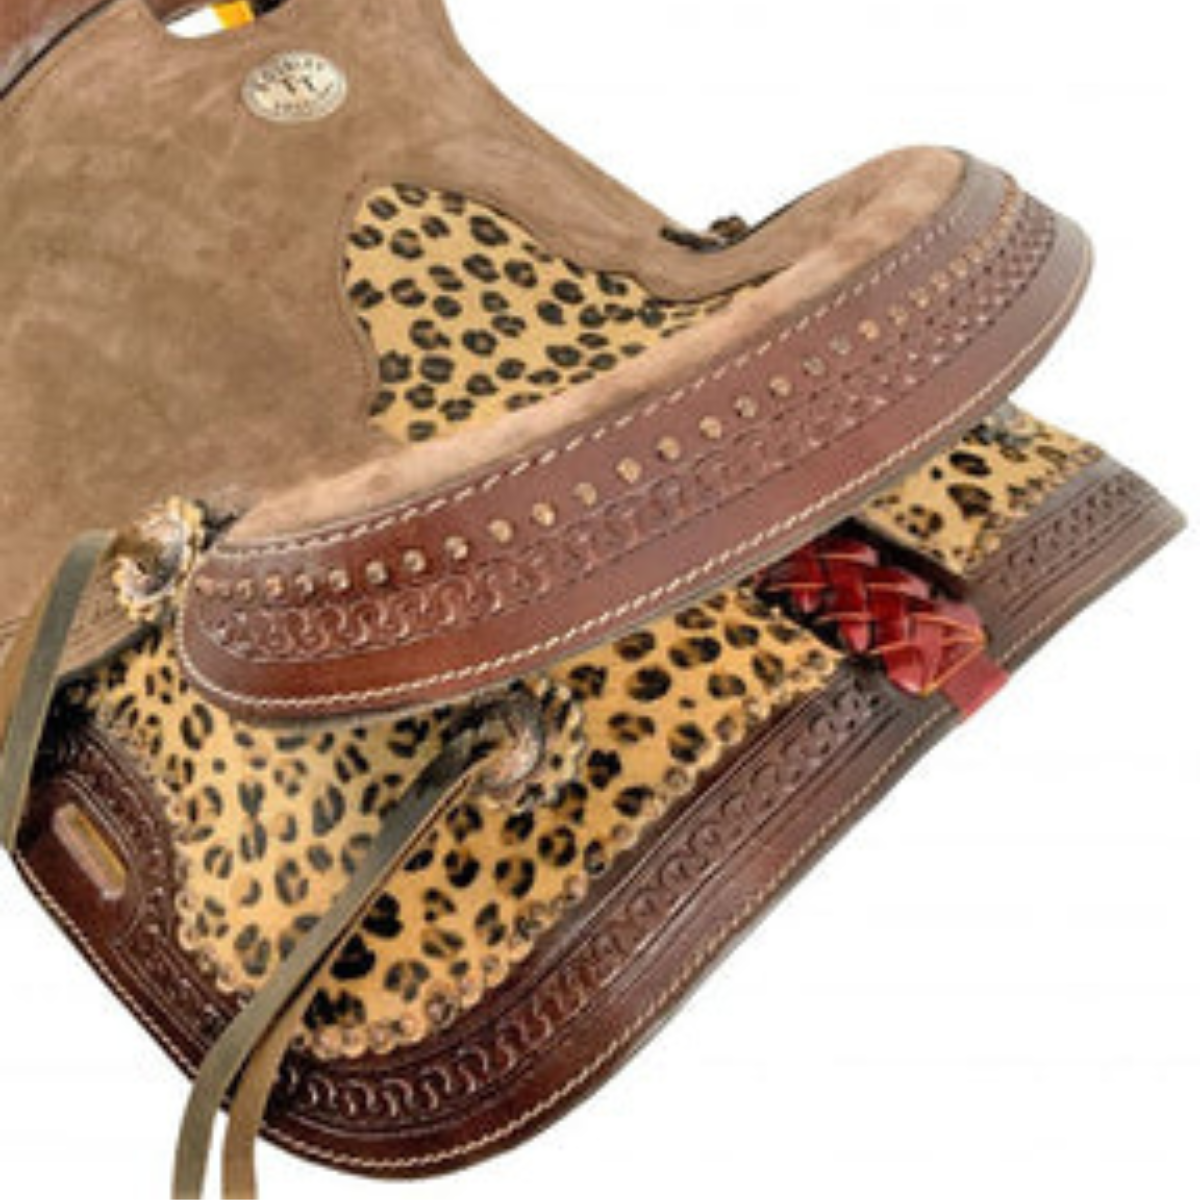 13" DOUBLE T HARD SEAT BARREL STYLE SADDLE WITH CHEETAH SEAT - Double T Saddles